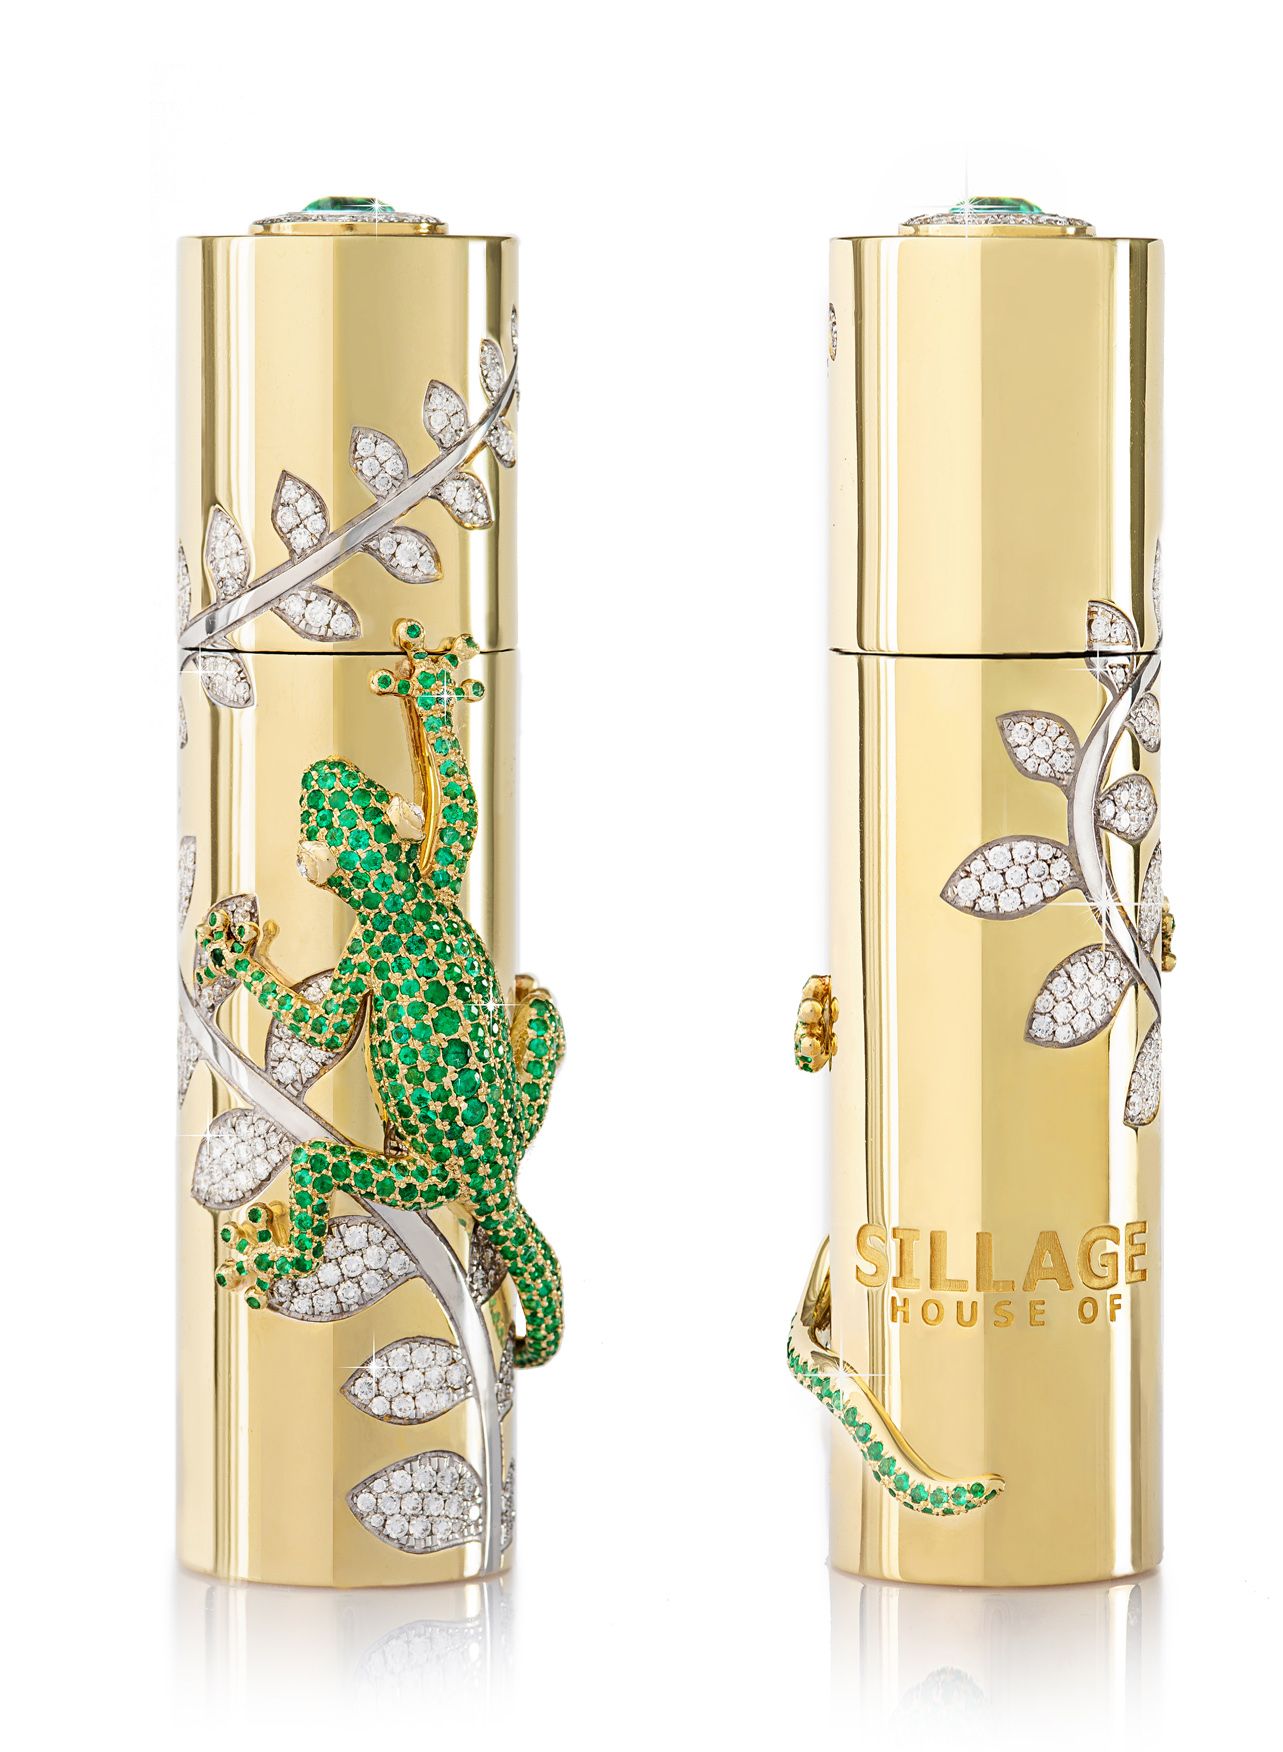 house of sillage perfume